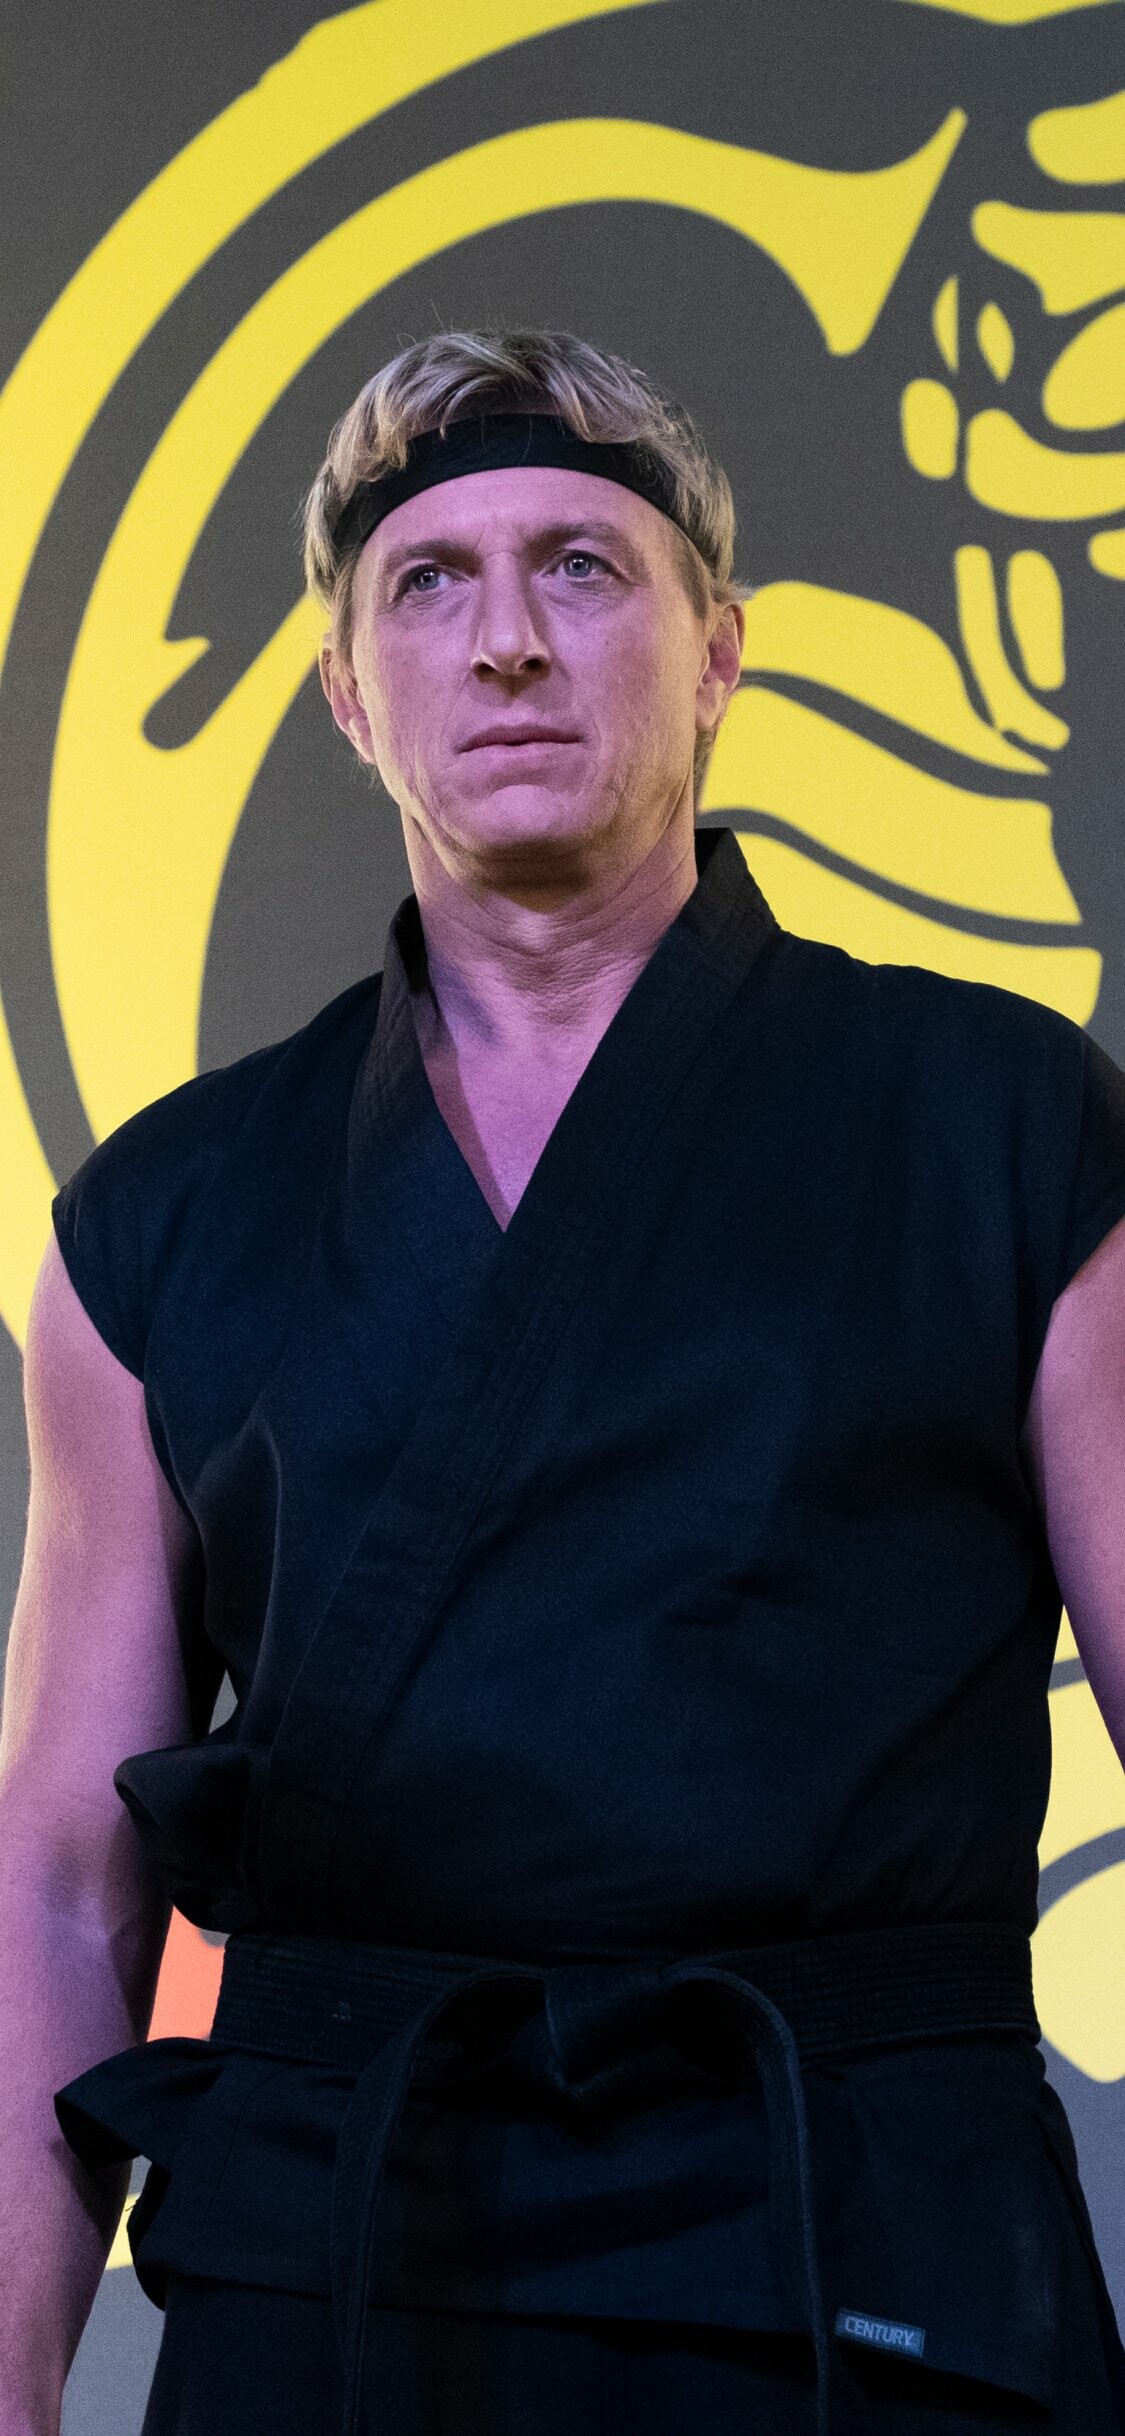 Cobra Kai (TV Series): TV show, Johnny Lawrence, a fictional character of the Karate Kid media franchise. 1130x2440 HD Wallpaper.